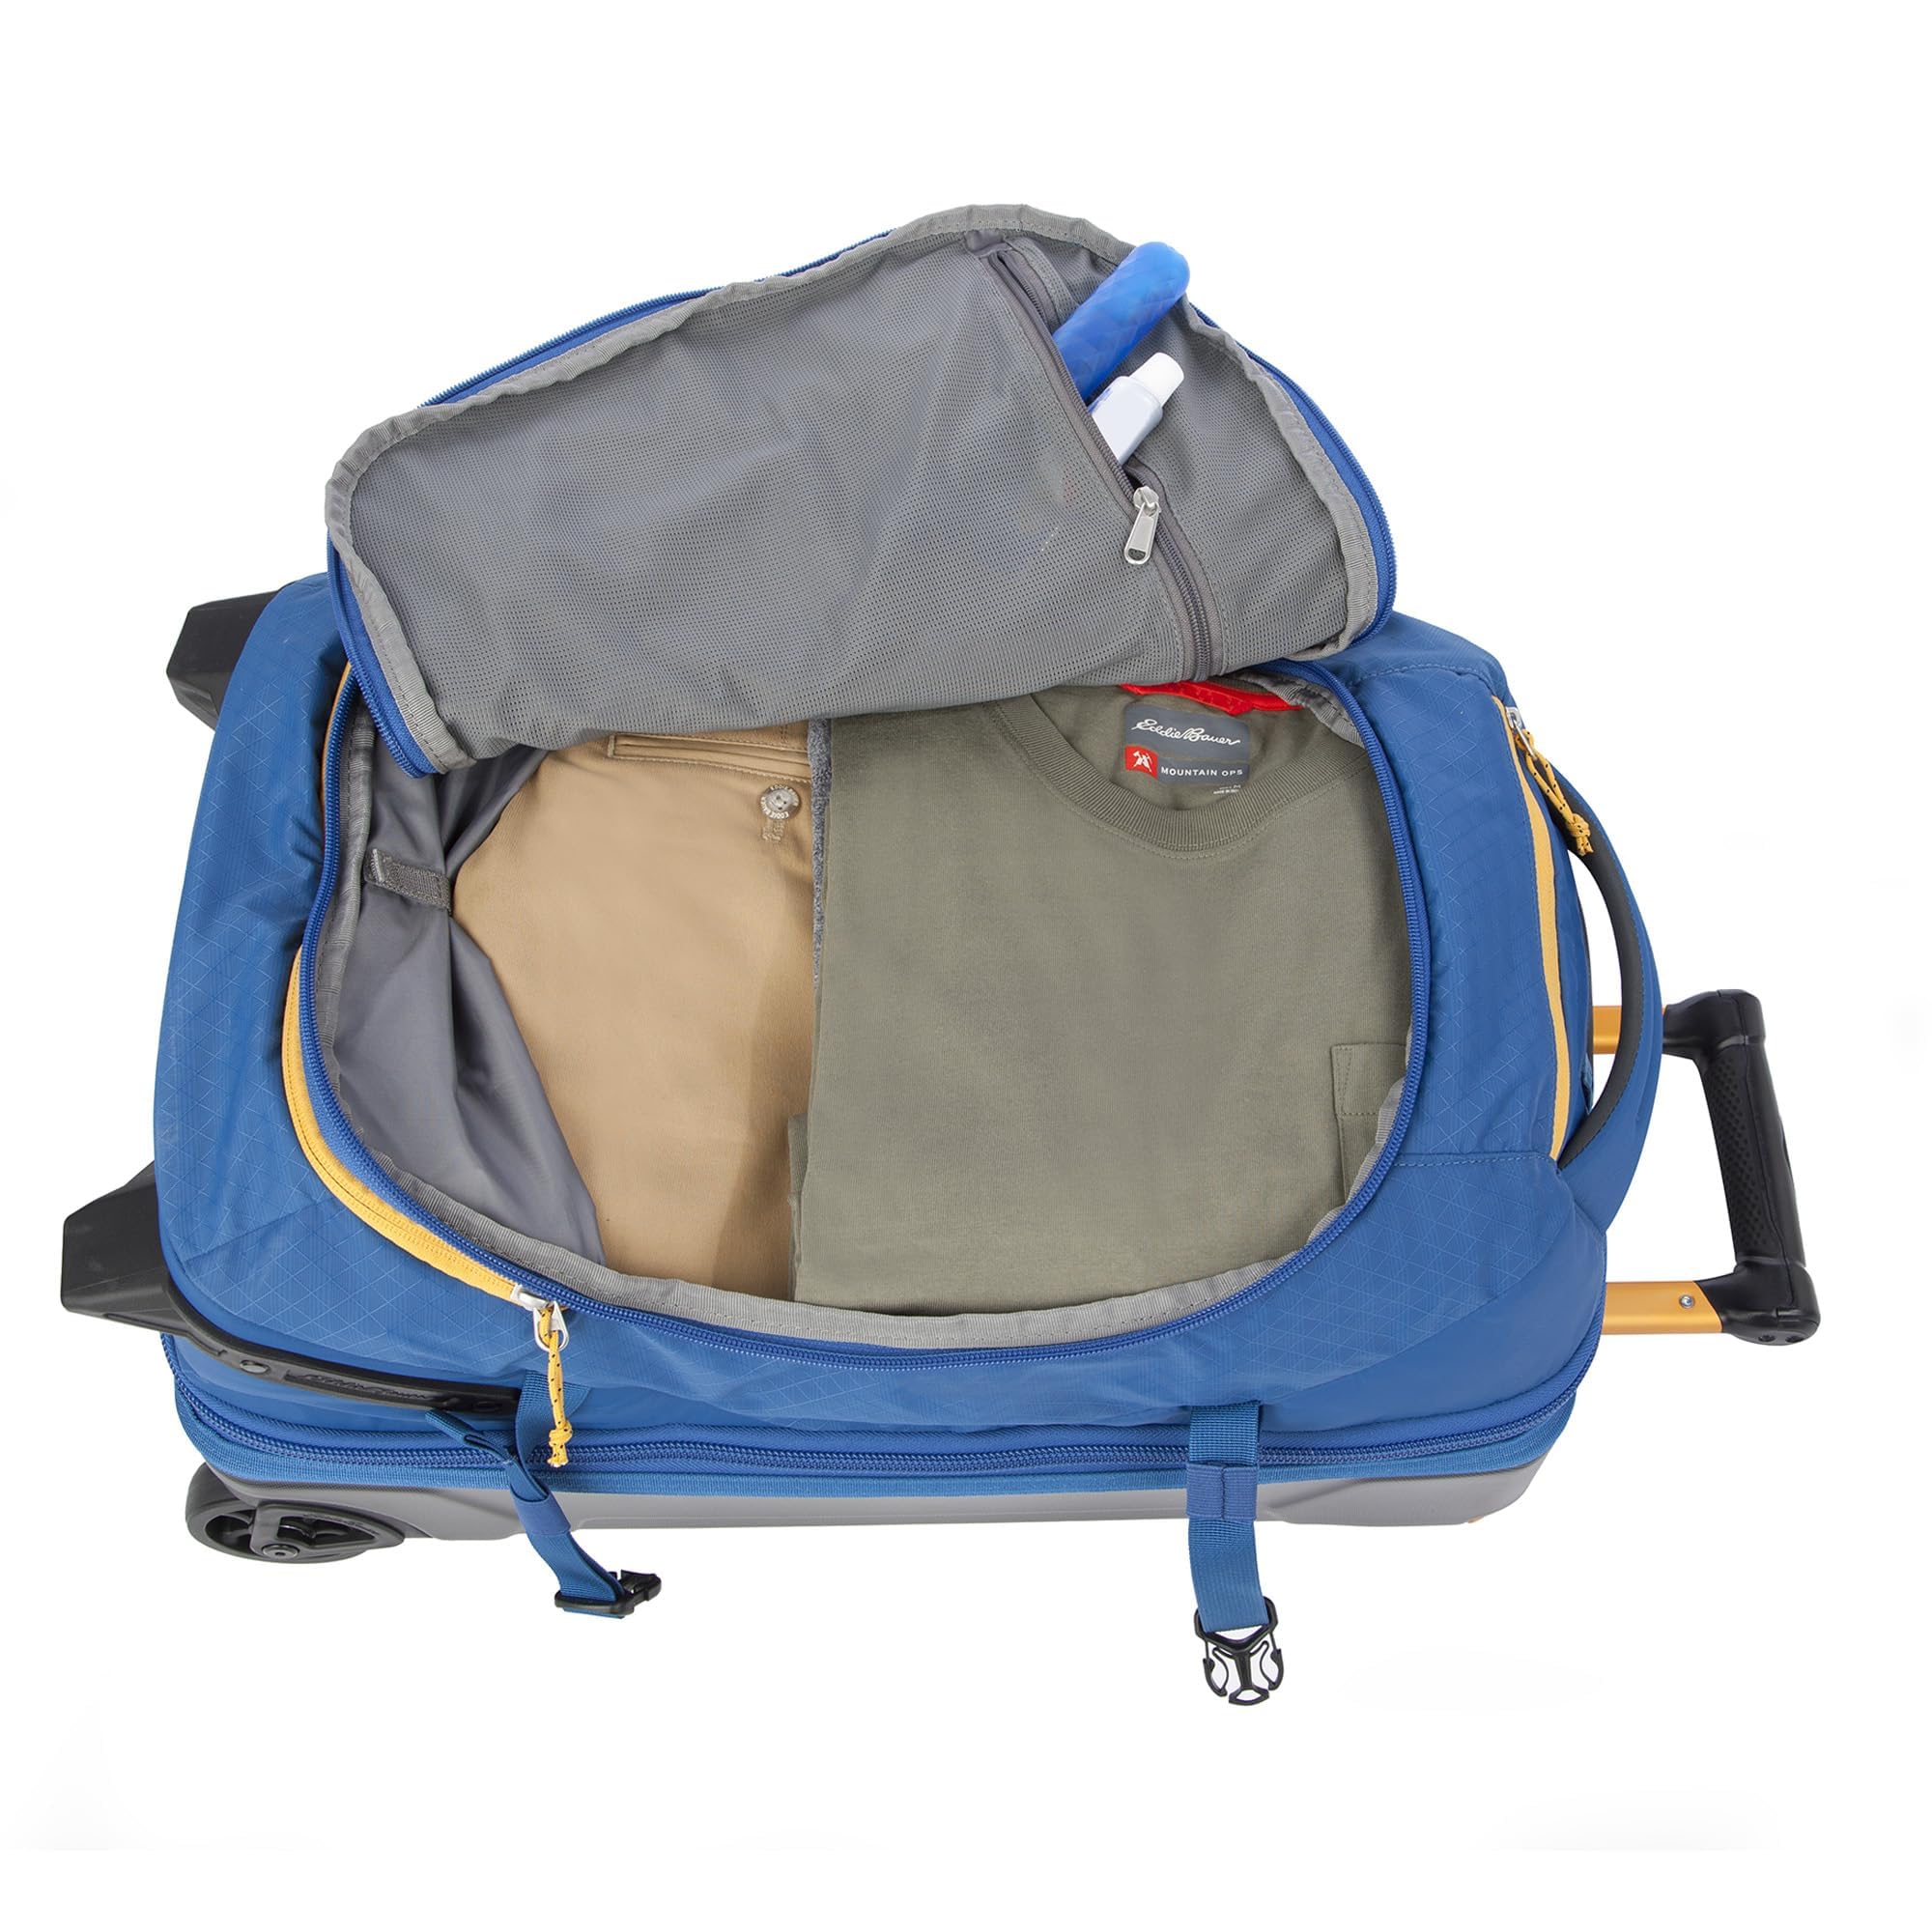 Eddie Bauer Expedition Duffel Bag 2.0 - Made From Rugged Polycarbonate and Nylon